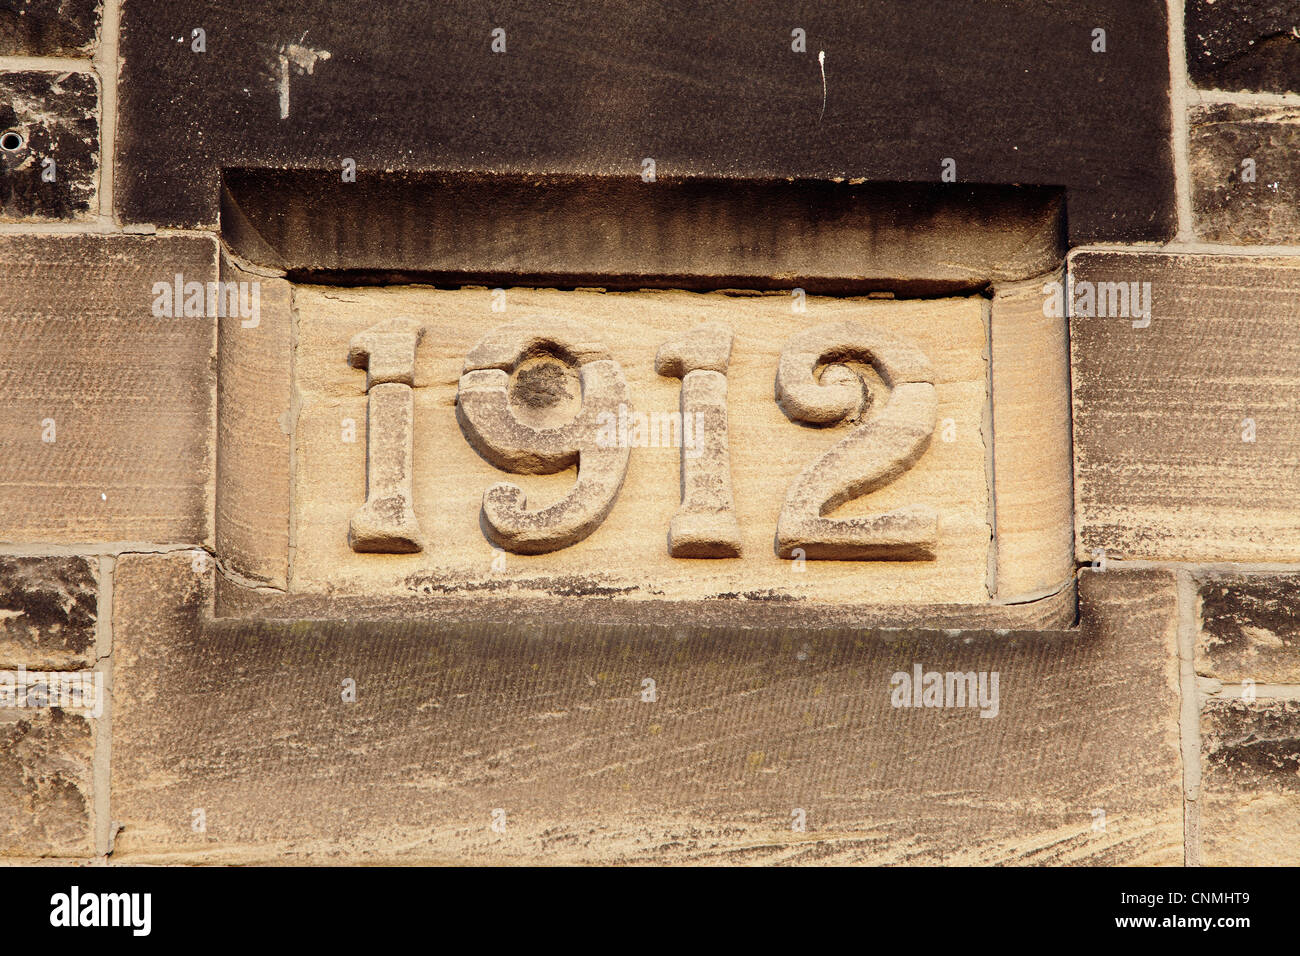 Year 1912 carved in stone on the exterior wall of a building, UK Stock Photo